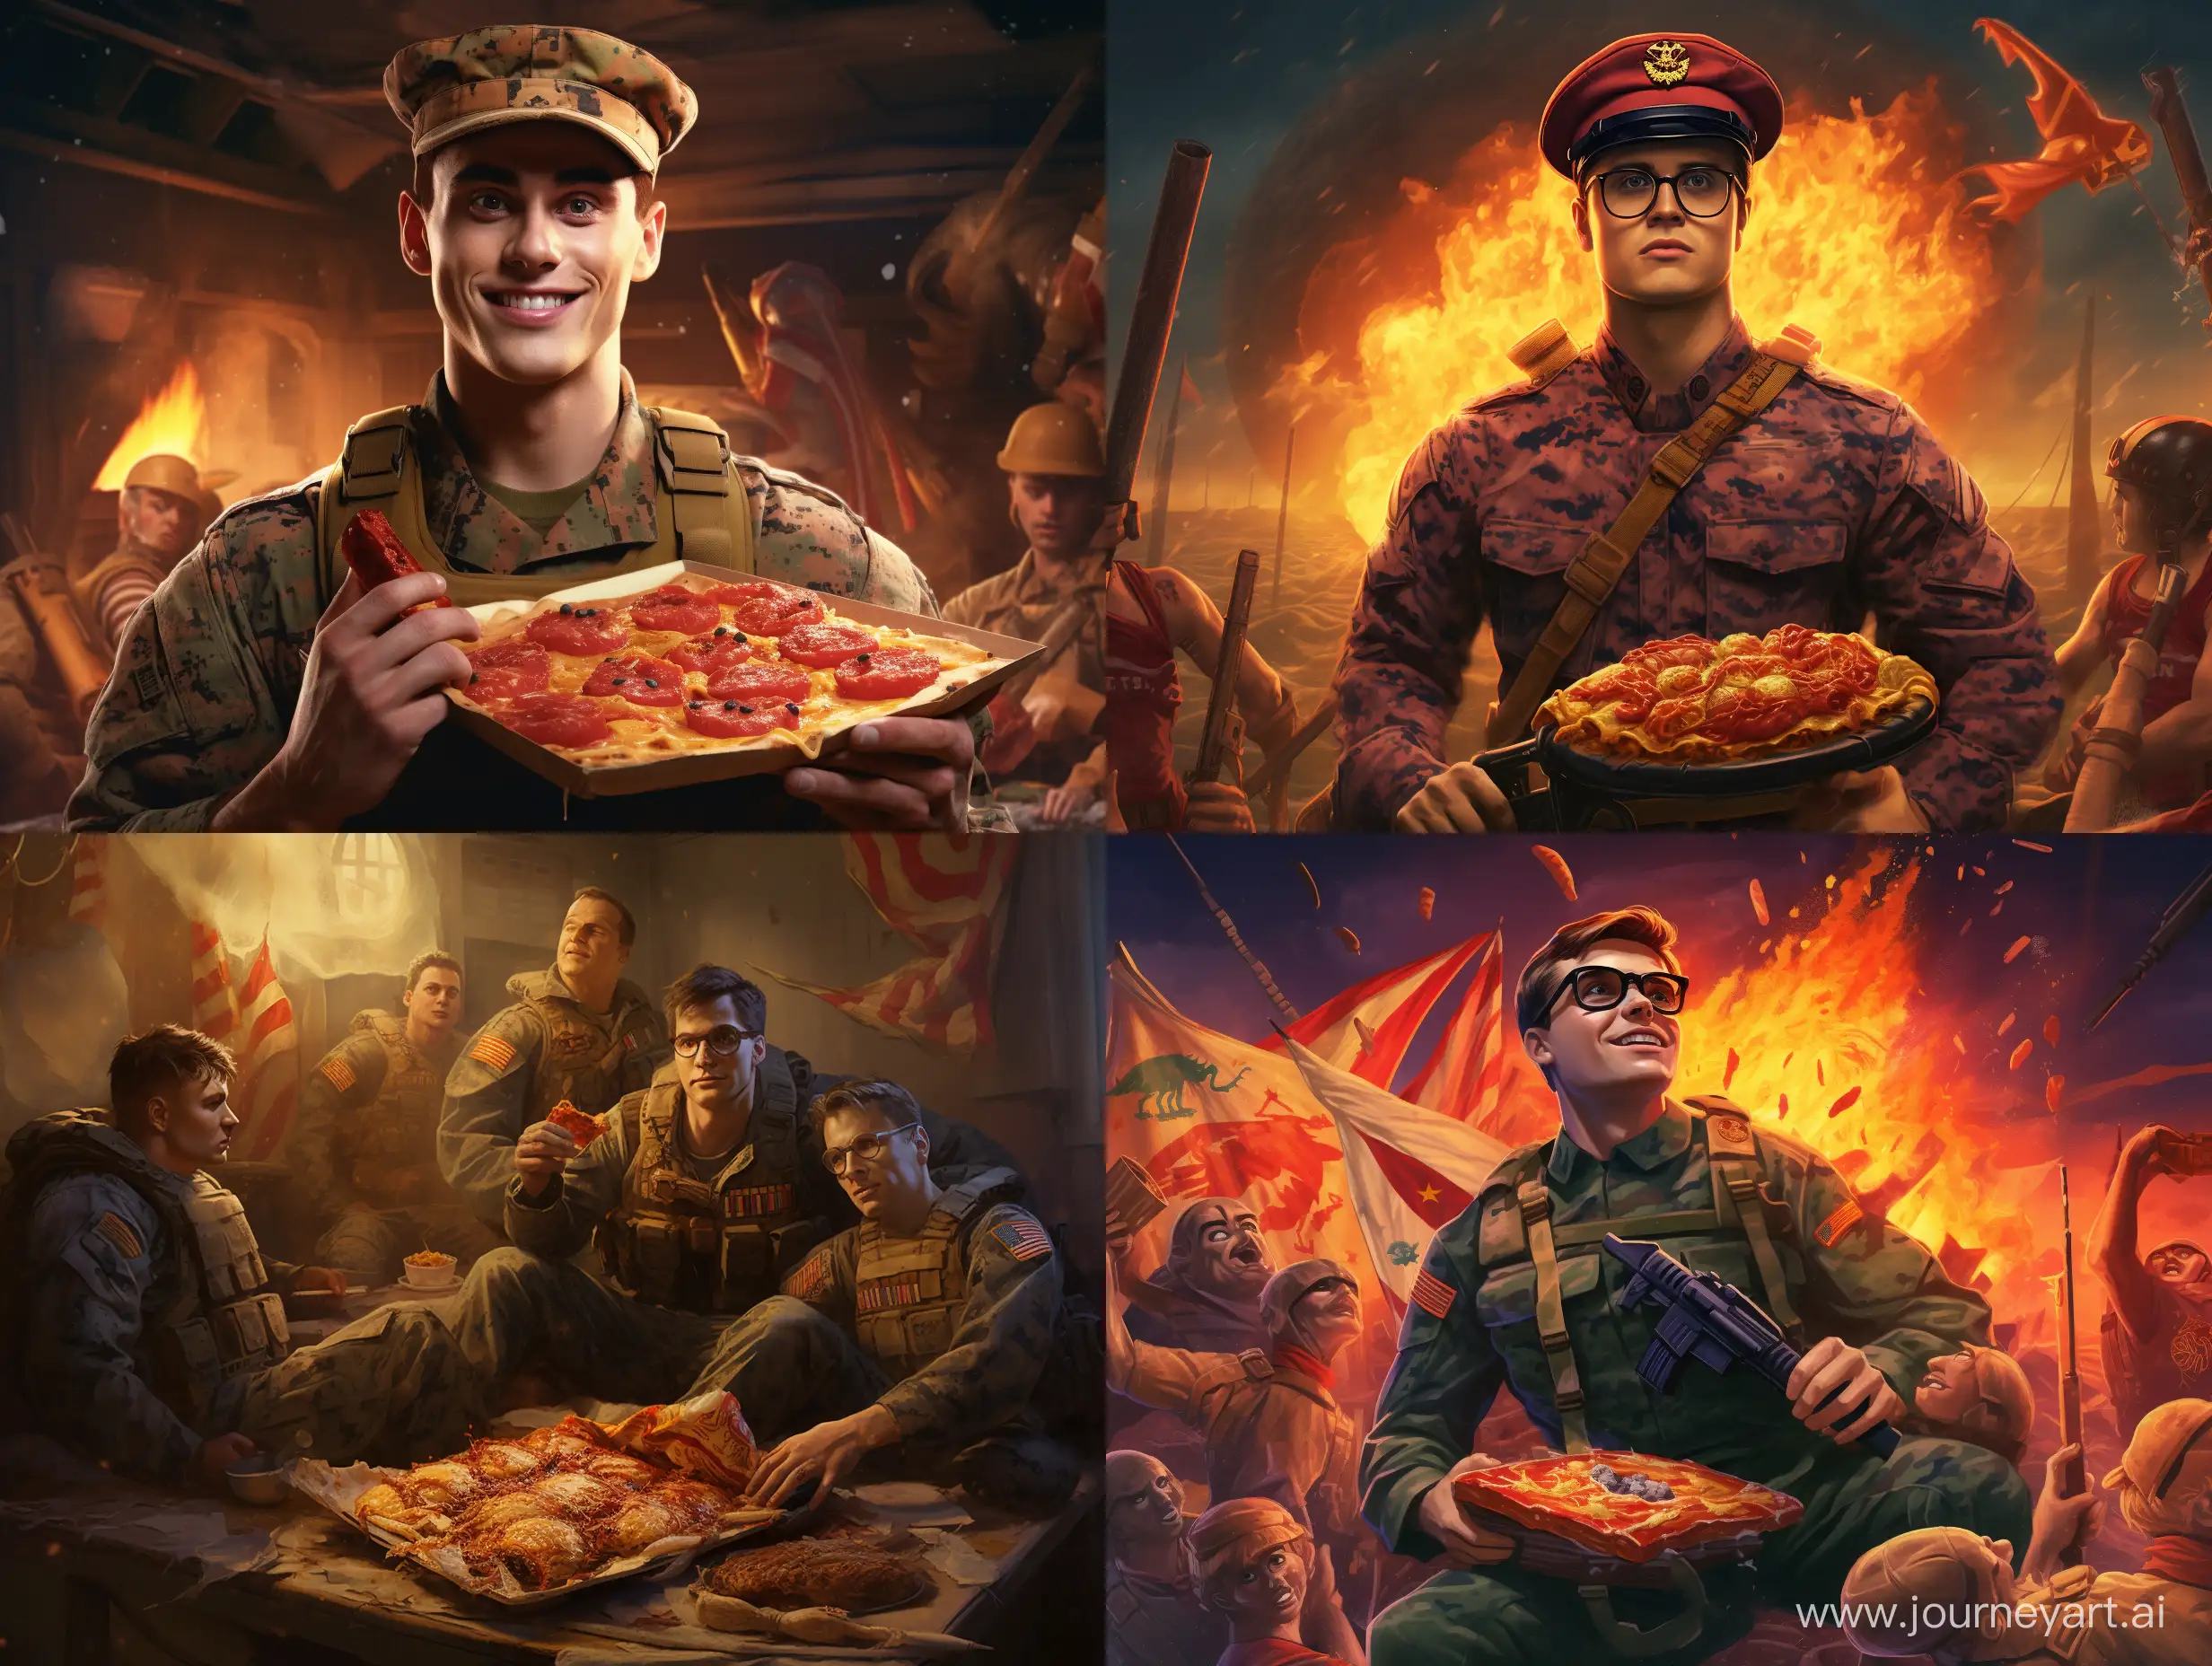 Harry-Potter-and-Marines-Enjoying-Pizza-Together-in-Magical-Setting